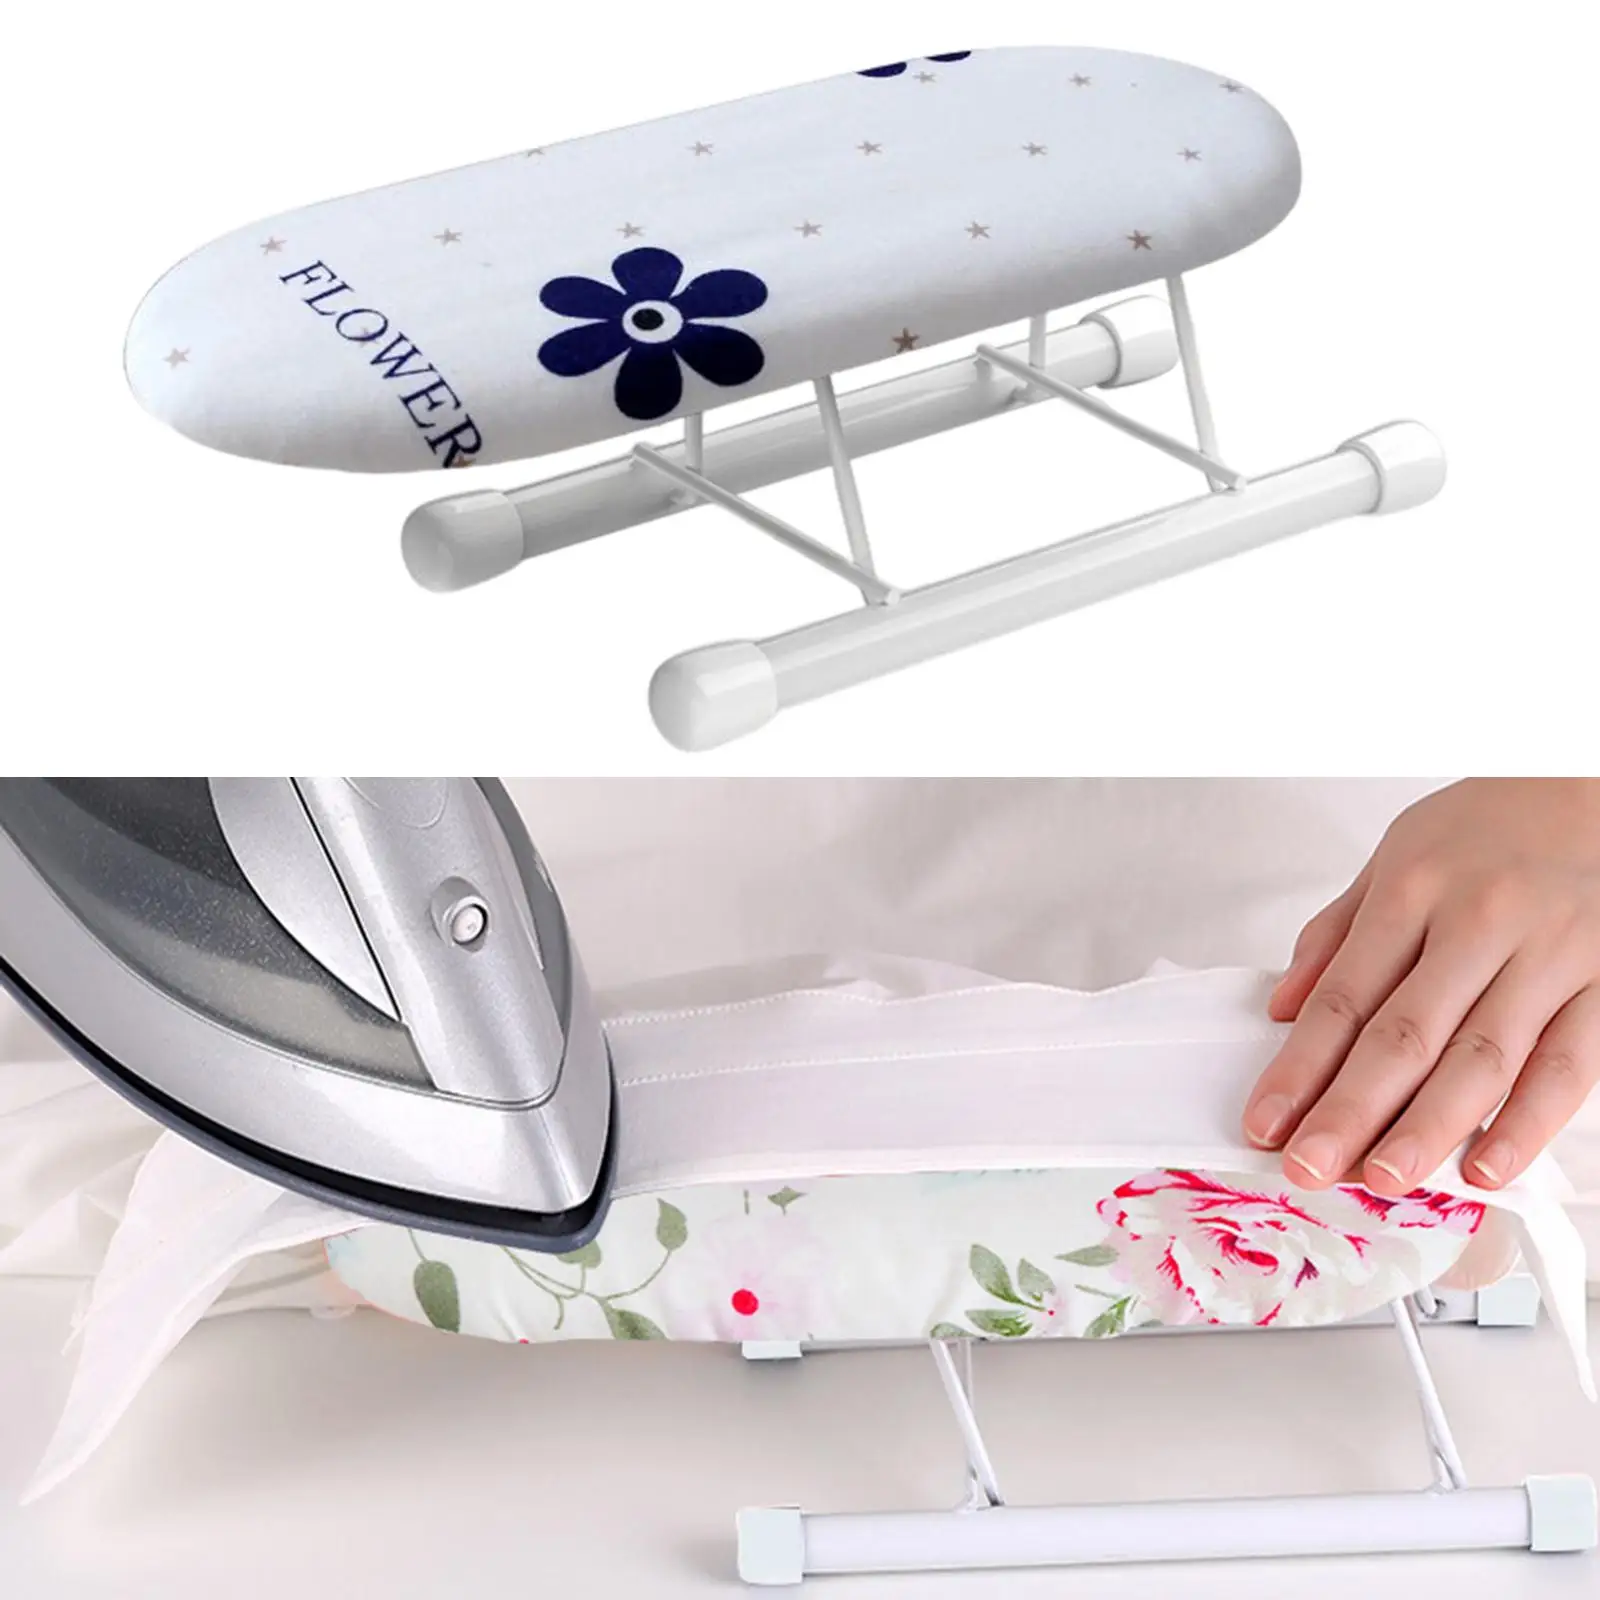 Travel Ironing Board Removable Sleeve Mini Folding Ironing Accessories for Travel Household Dorms Home Ironing Clothes